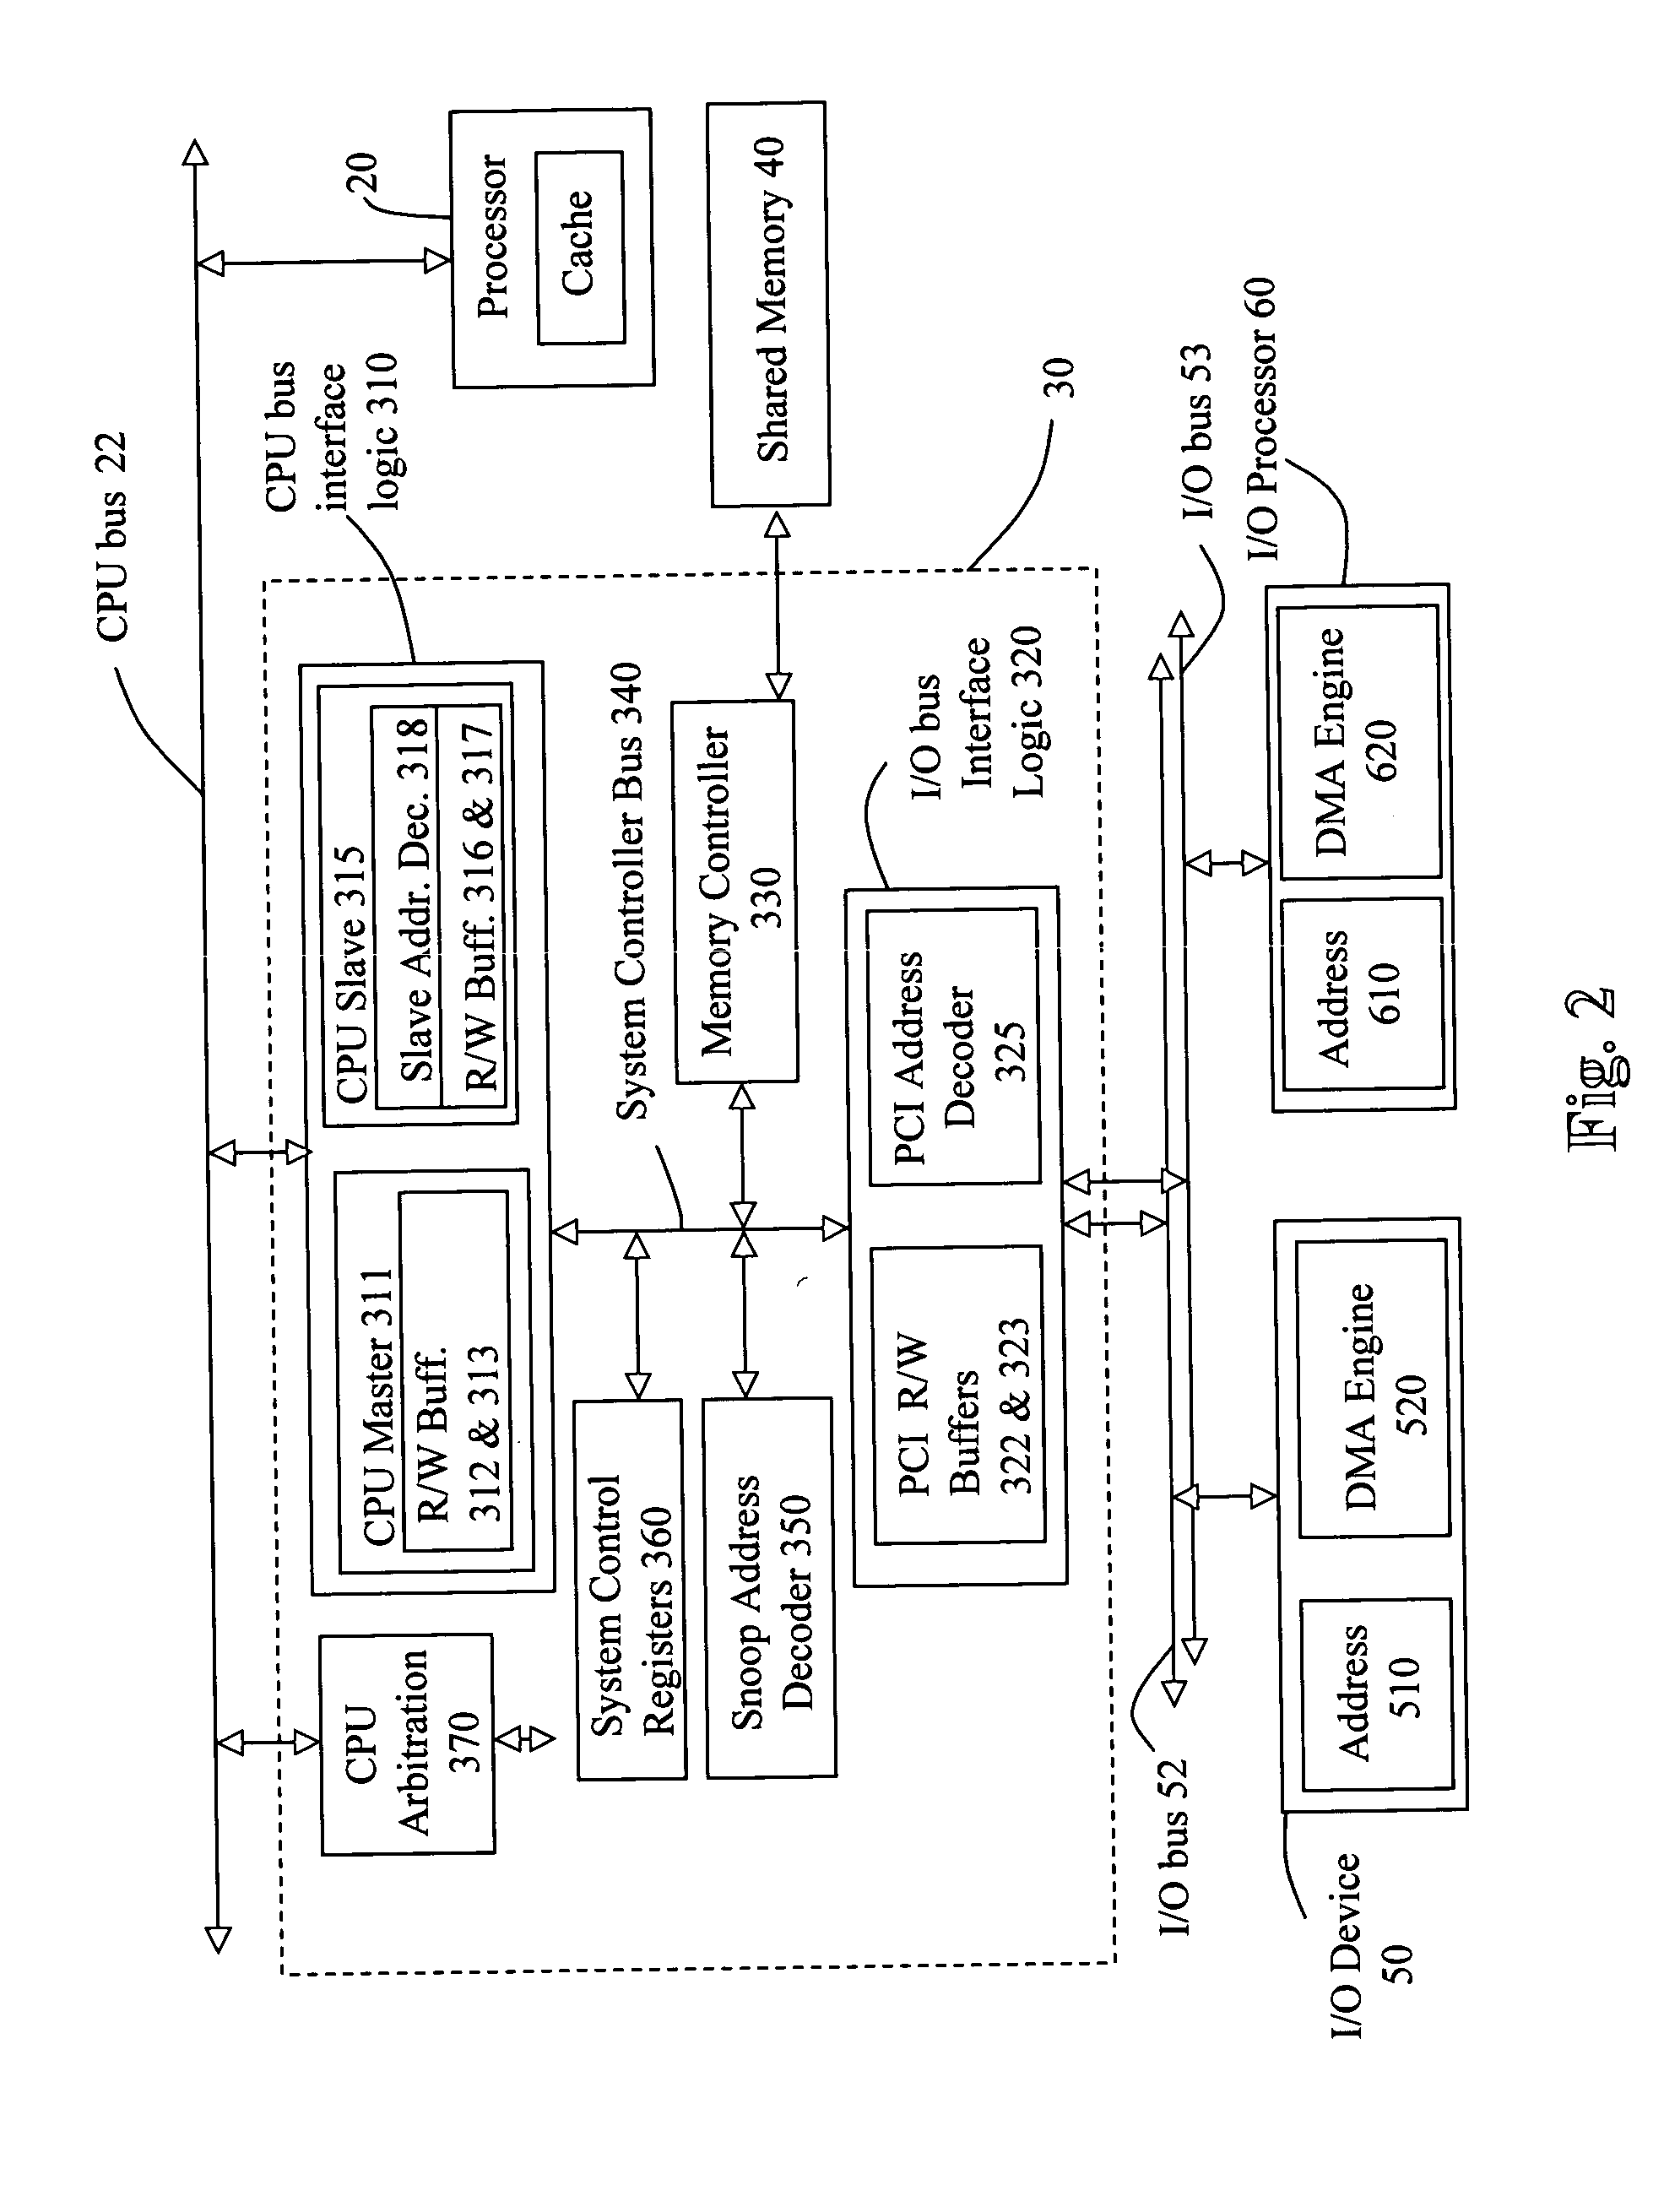 Method for efficiently processing DMA transactions